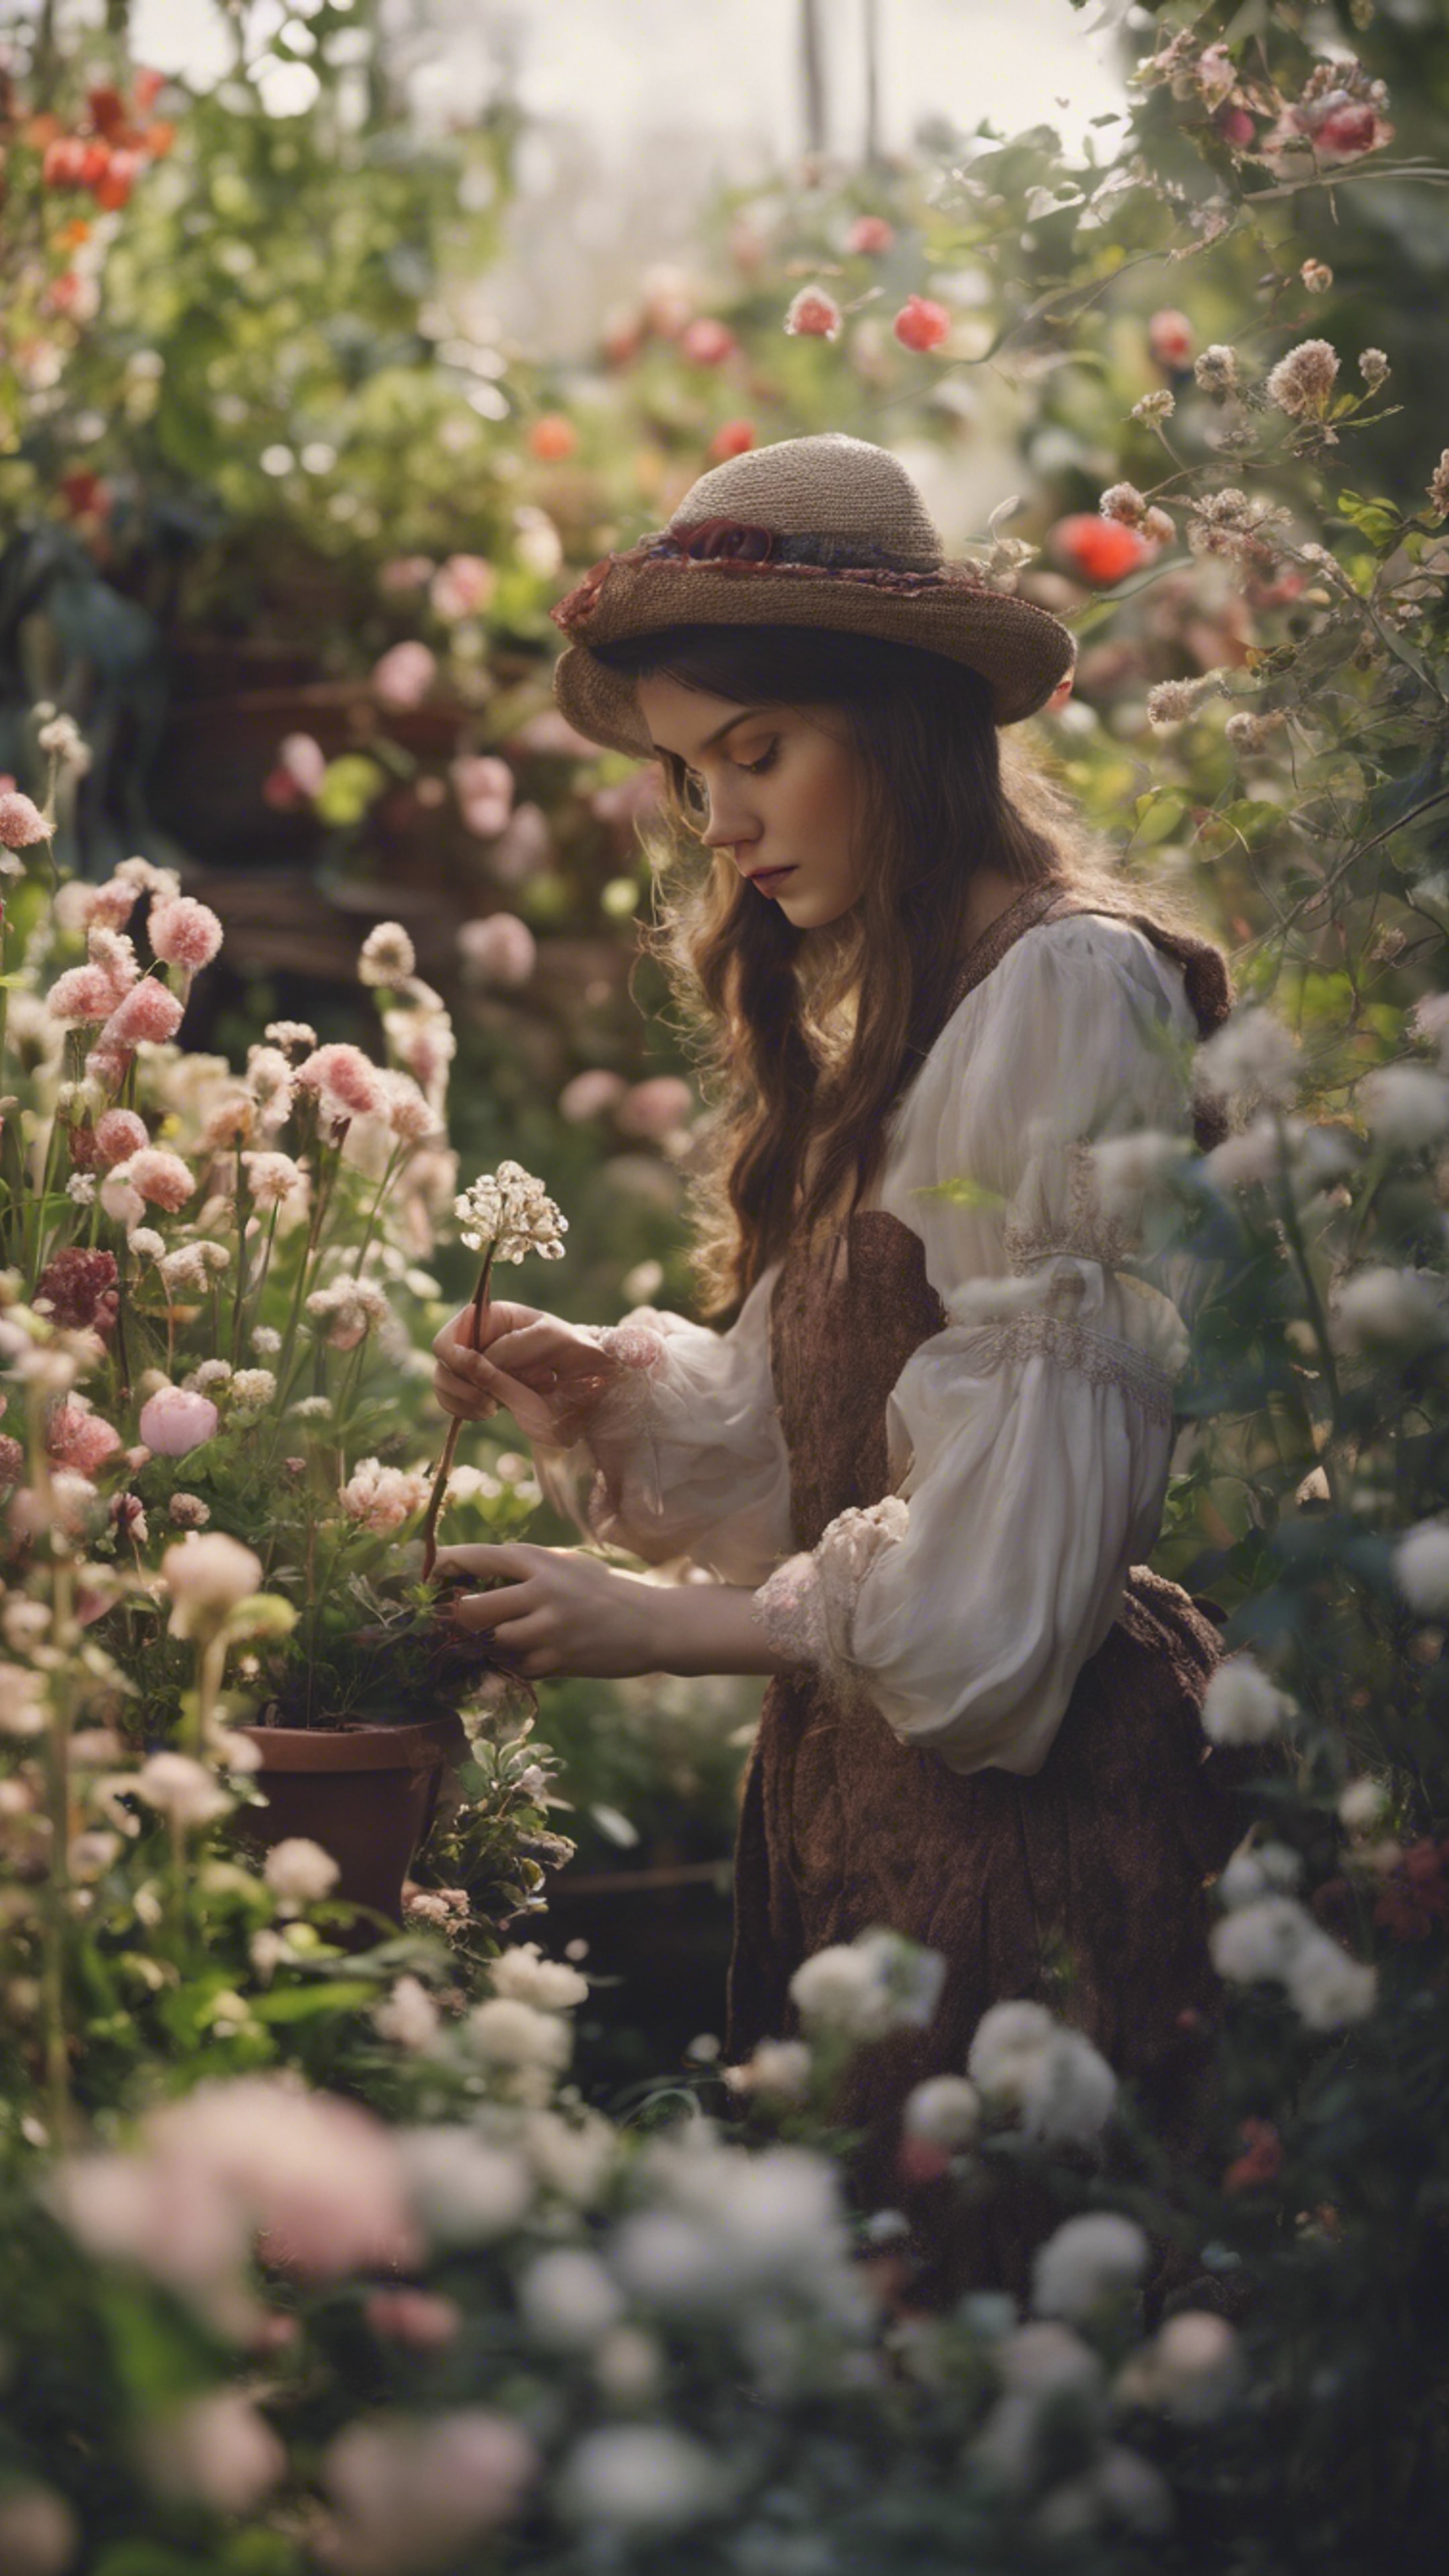 A young witch in a flower garden, tending to her magical plants. Papel de parede[4b0753822f47417e91be]